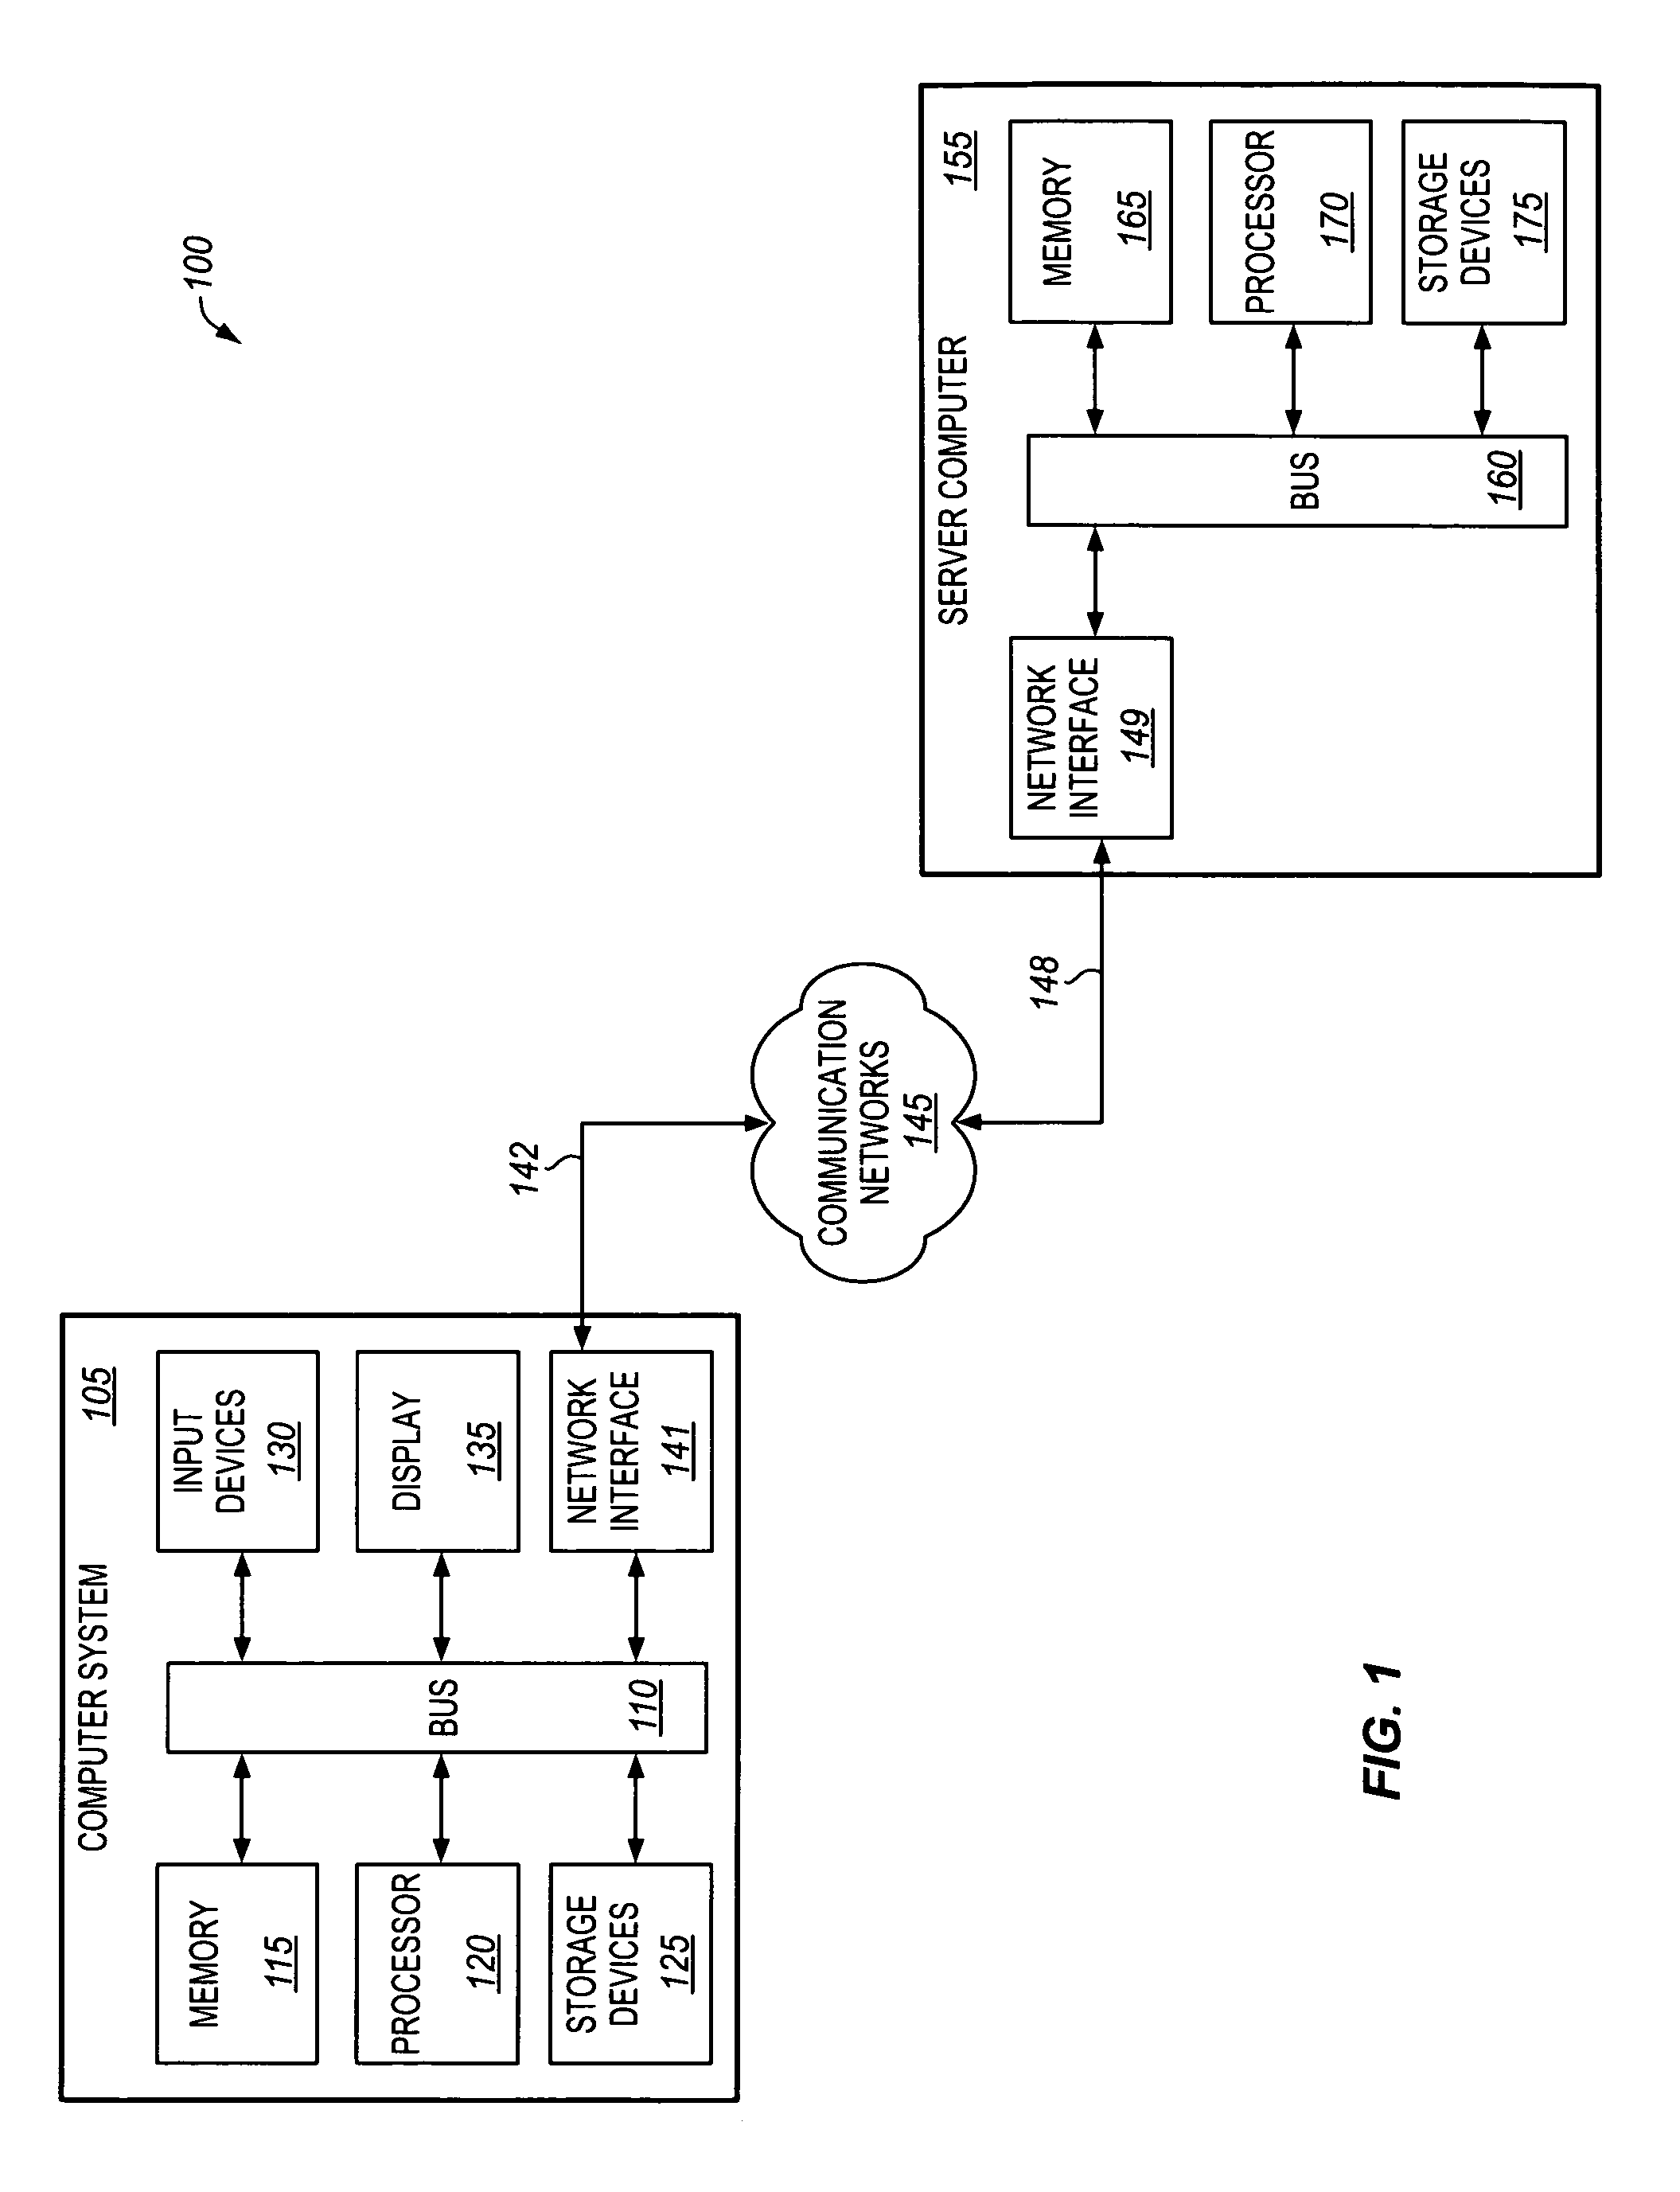 Method and apparatus for extracting relevant content based on user preferences indicated by user actions